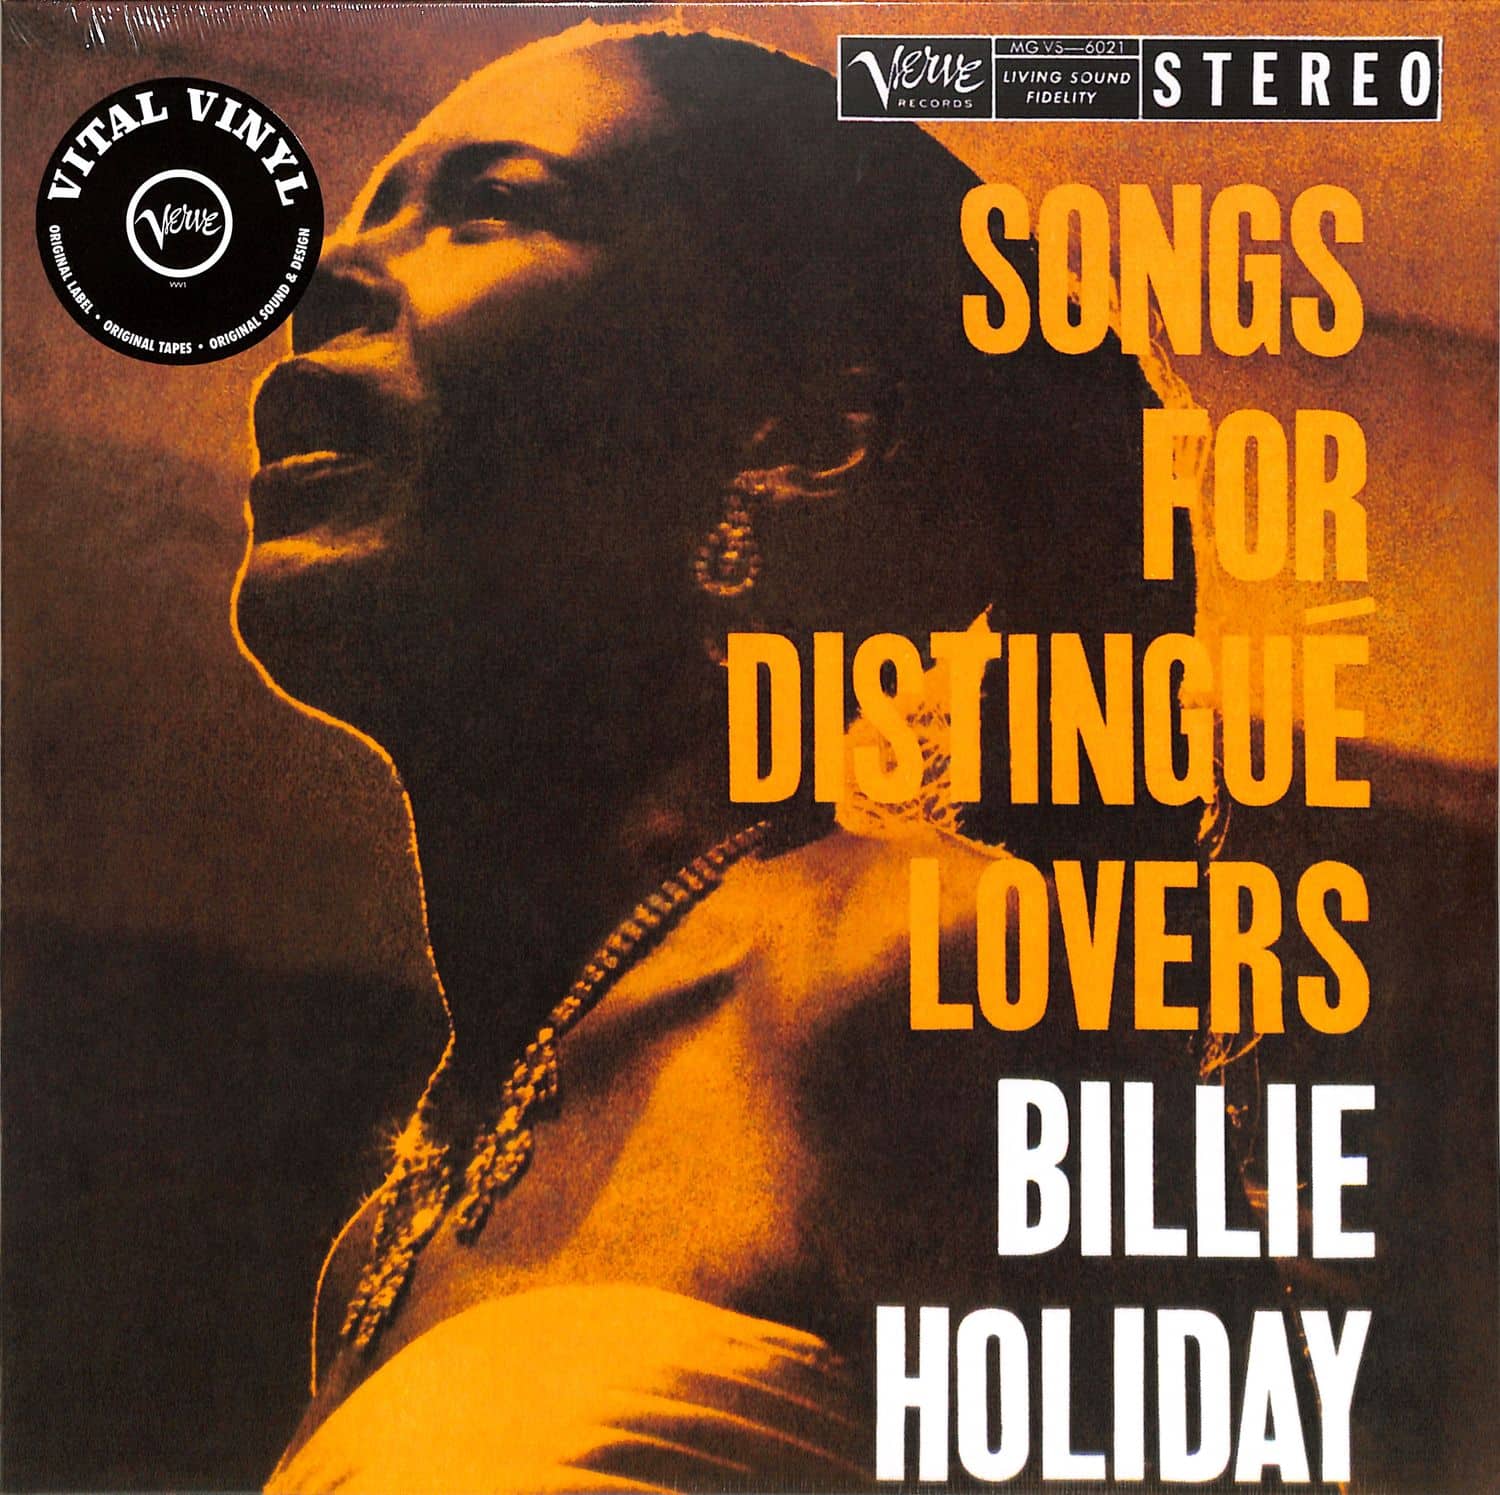 Billie Holiday - SONGS FOR DISTINGUE LOVERS 